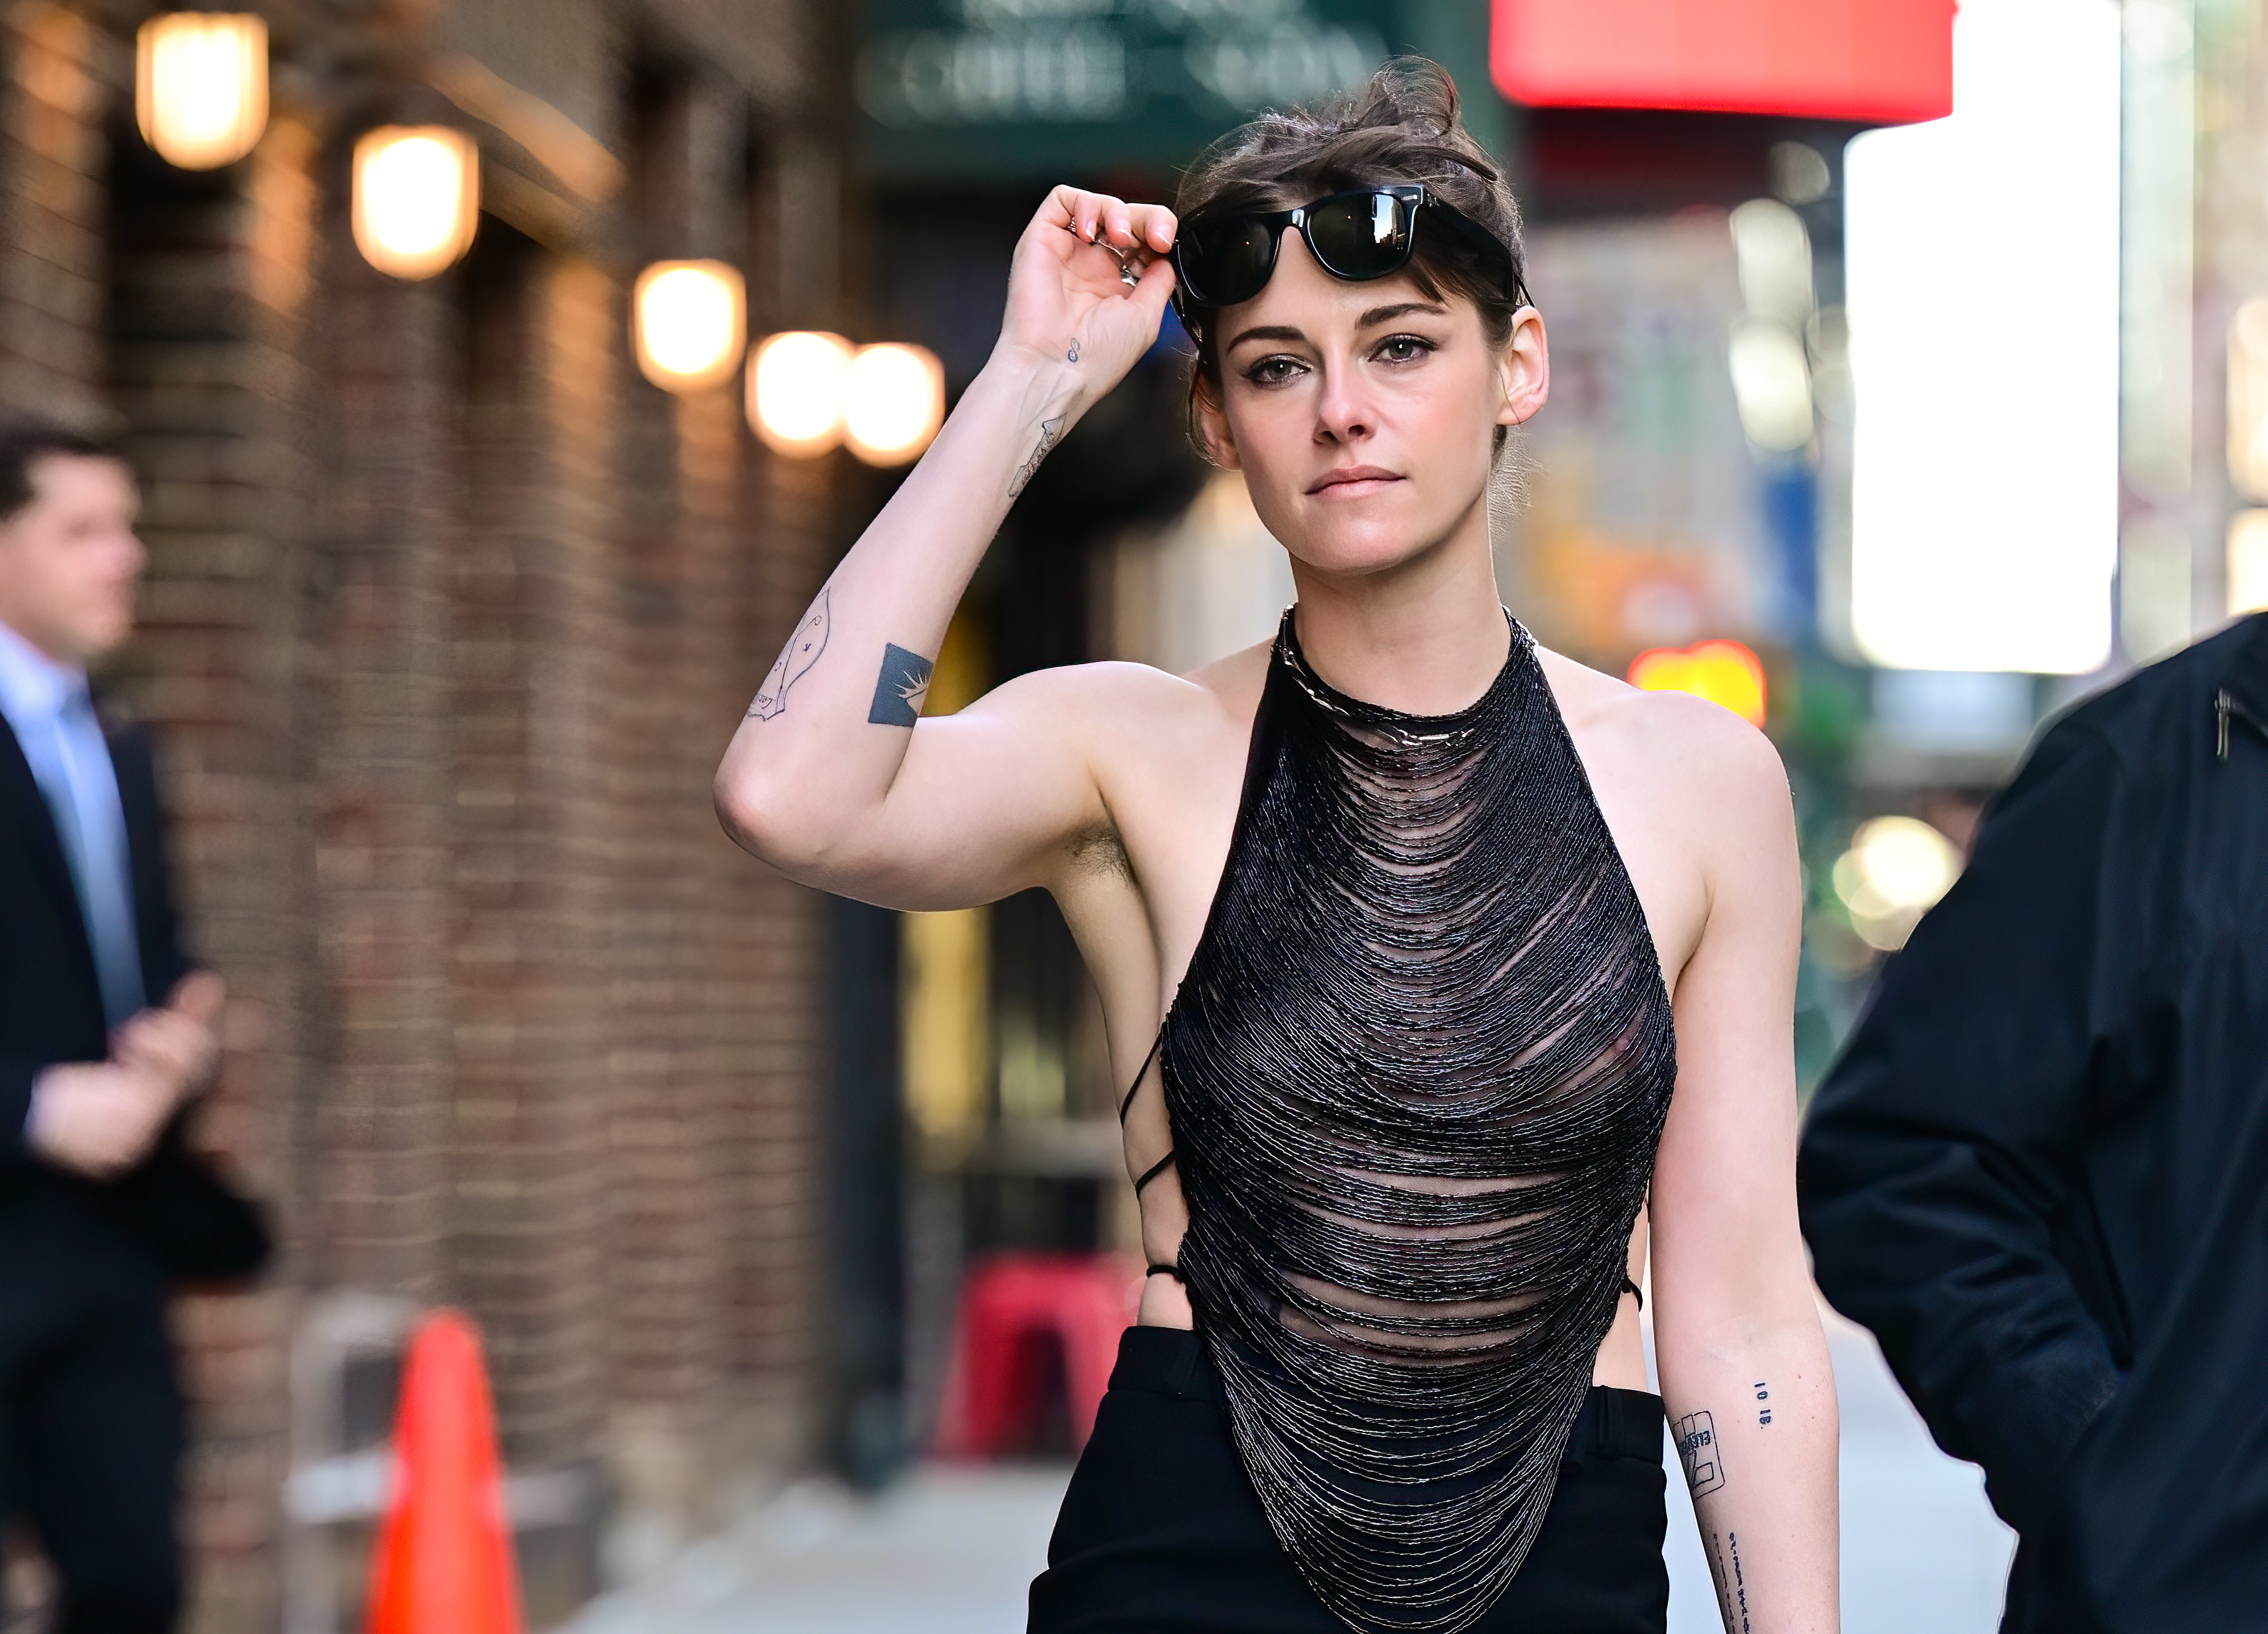 Kristen Stewart walks down a street, lifting sunglasses from her eyes. She wears a sleeveless, open-back, shredded-style top and black pants